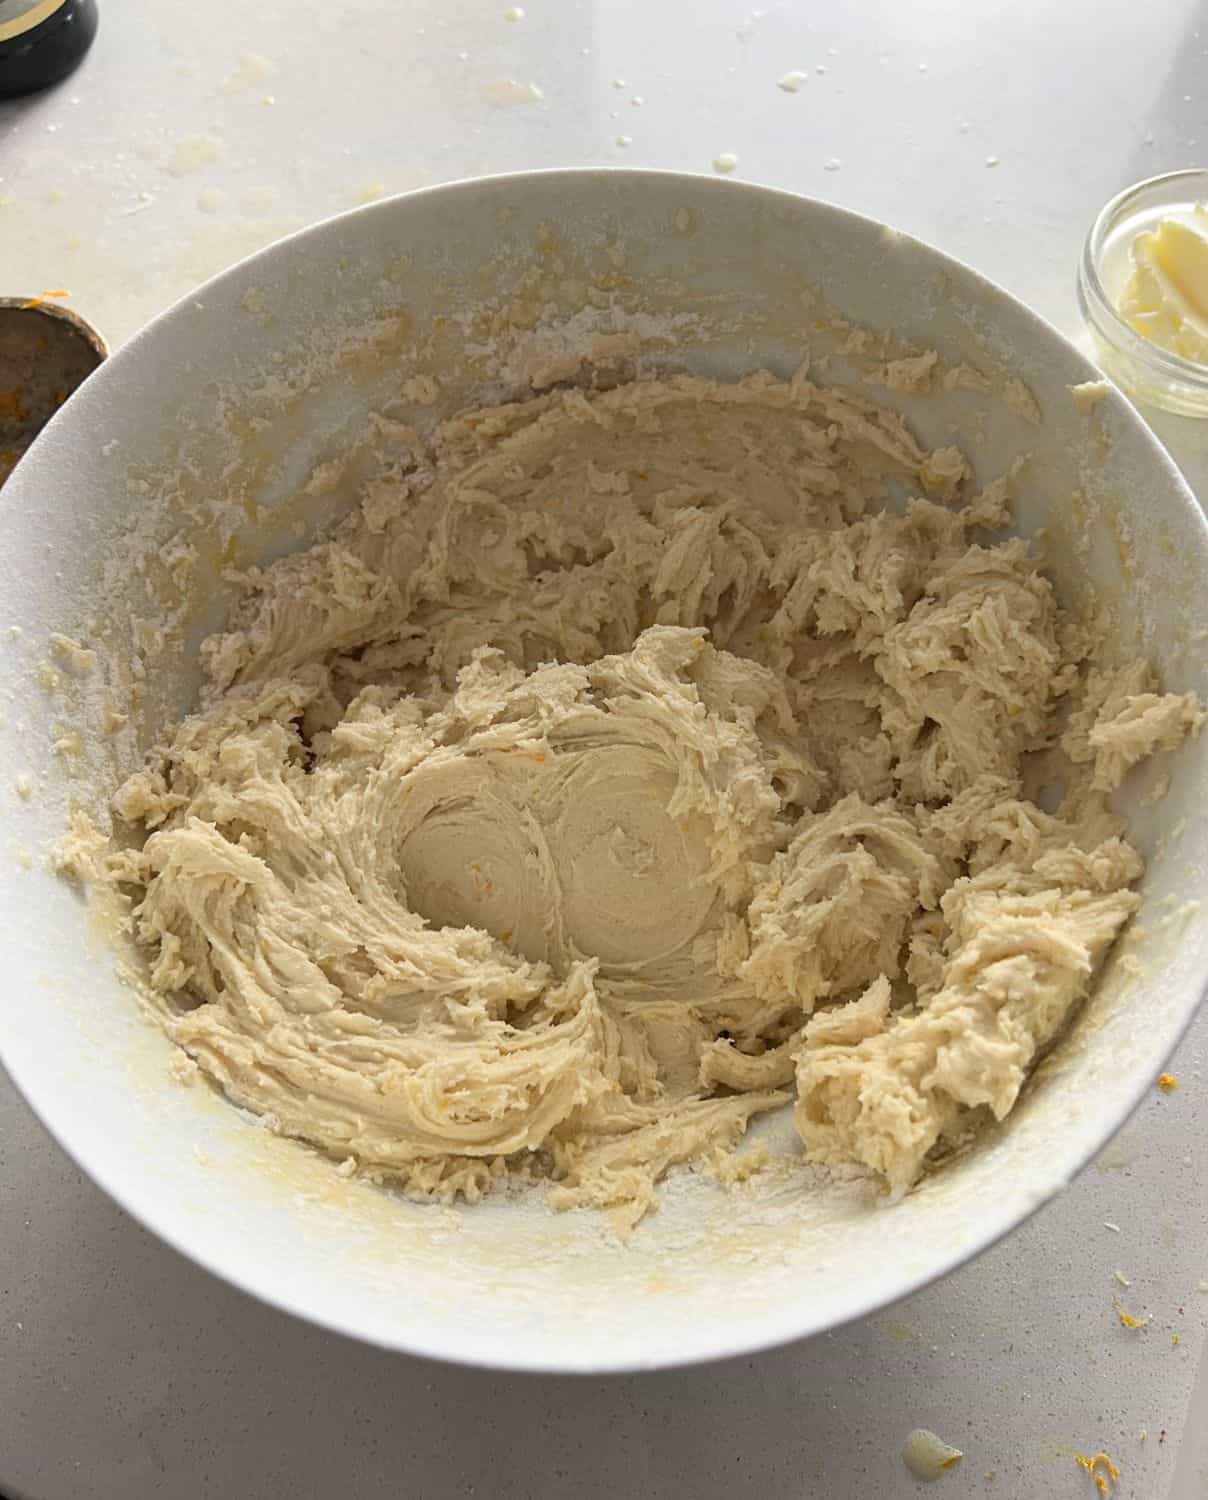 All the cookie ingredients combined in a bowl.